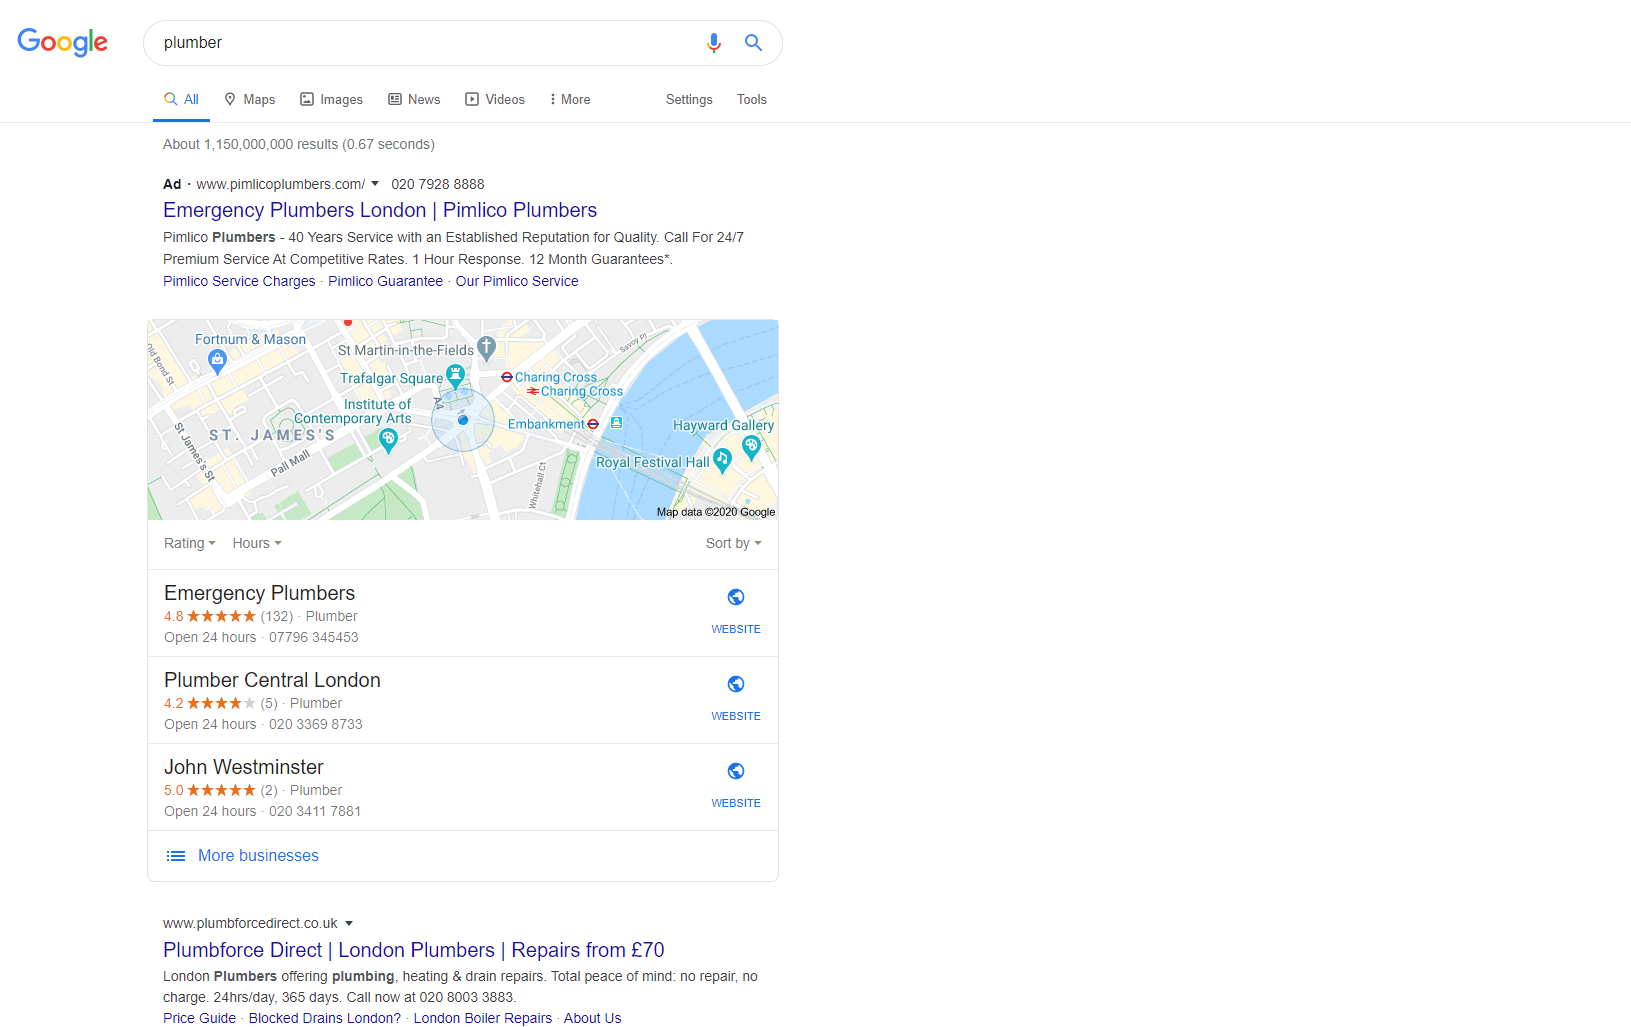 Search engine result for plumber in London